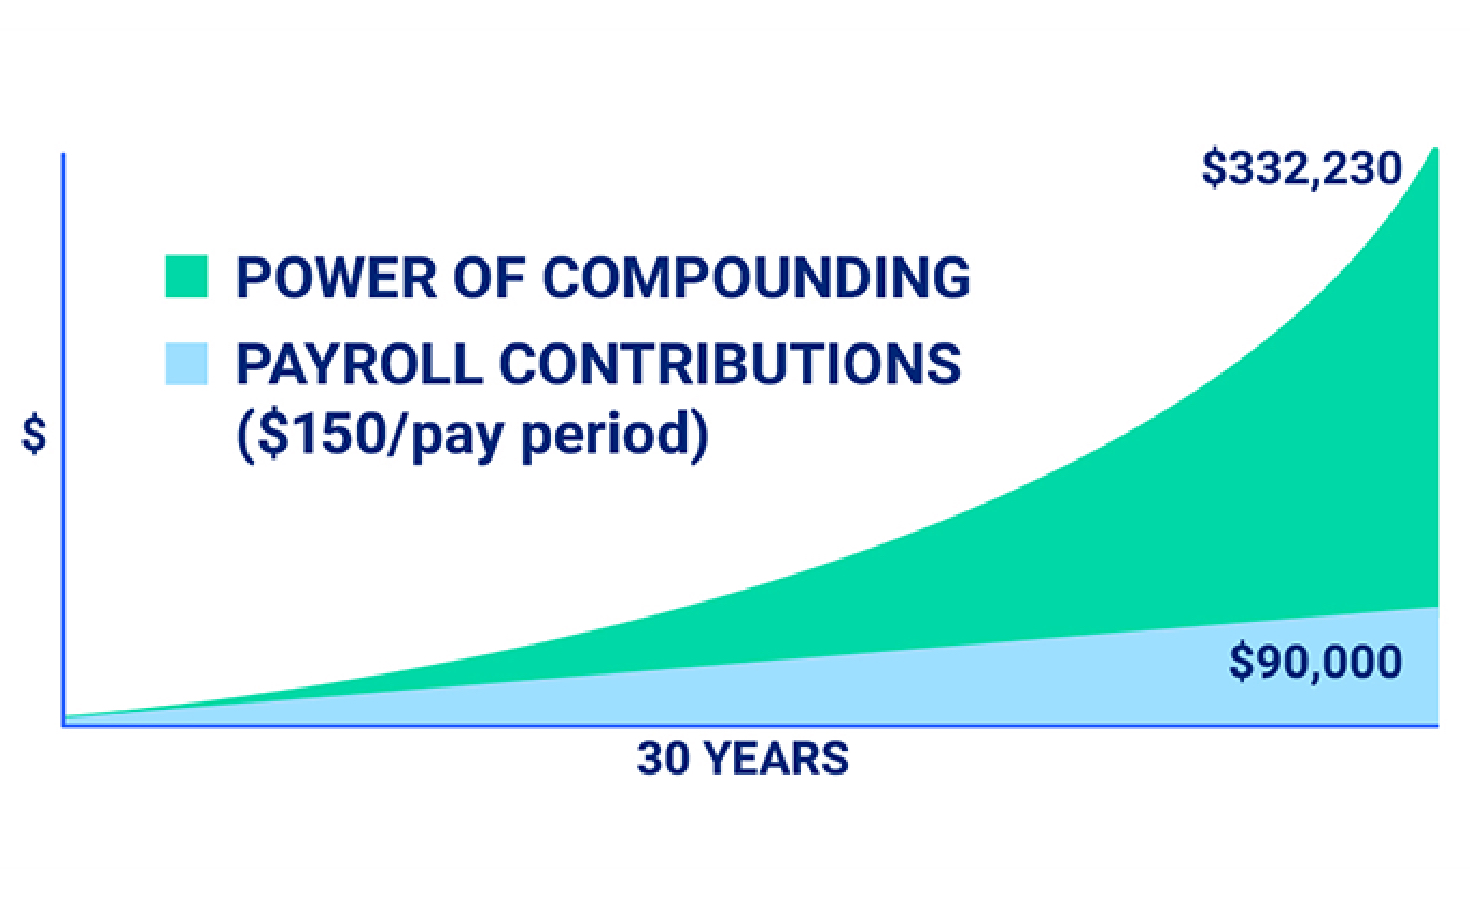 chart showing the power of compounding vs payroll contributions over 30 years